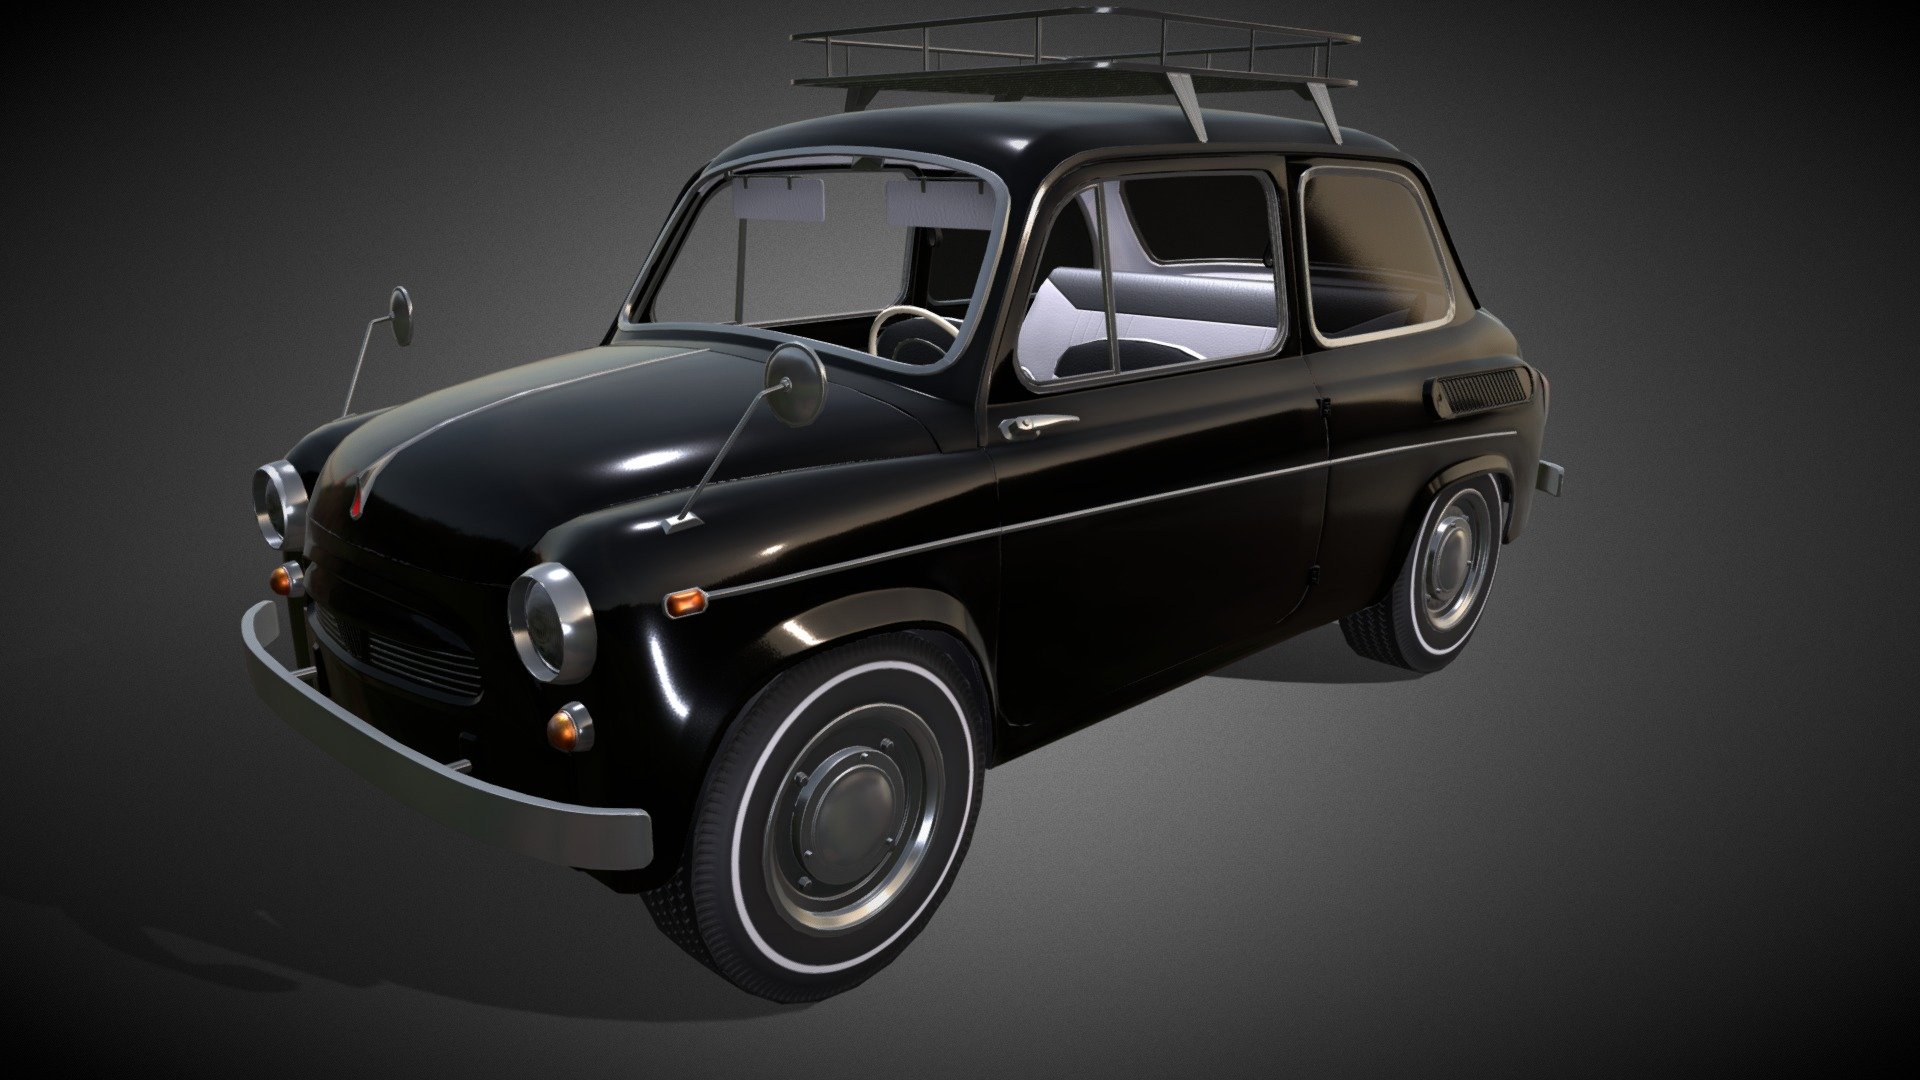 Zaz-965 (Ukrainian: Запоро́жець) was a series of rear-wheel-drive superminis (city cars in their first generation) designed and built from 1958 at the ZAZ factory in Soviet Ukraine.

The Zaz-965 3D model is lowpoly which comes with a highpoly version (2,716,105 polygons) for baking 3d model